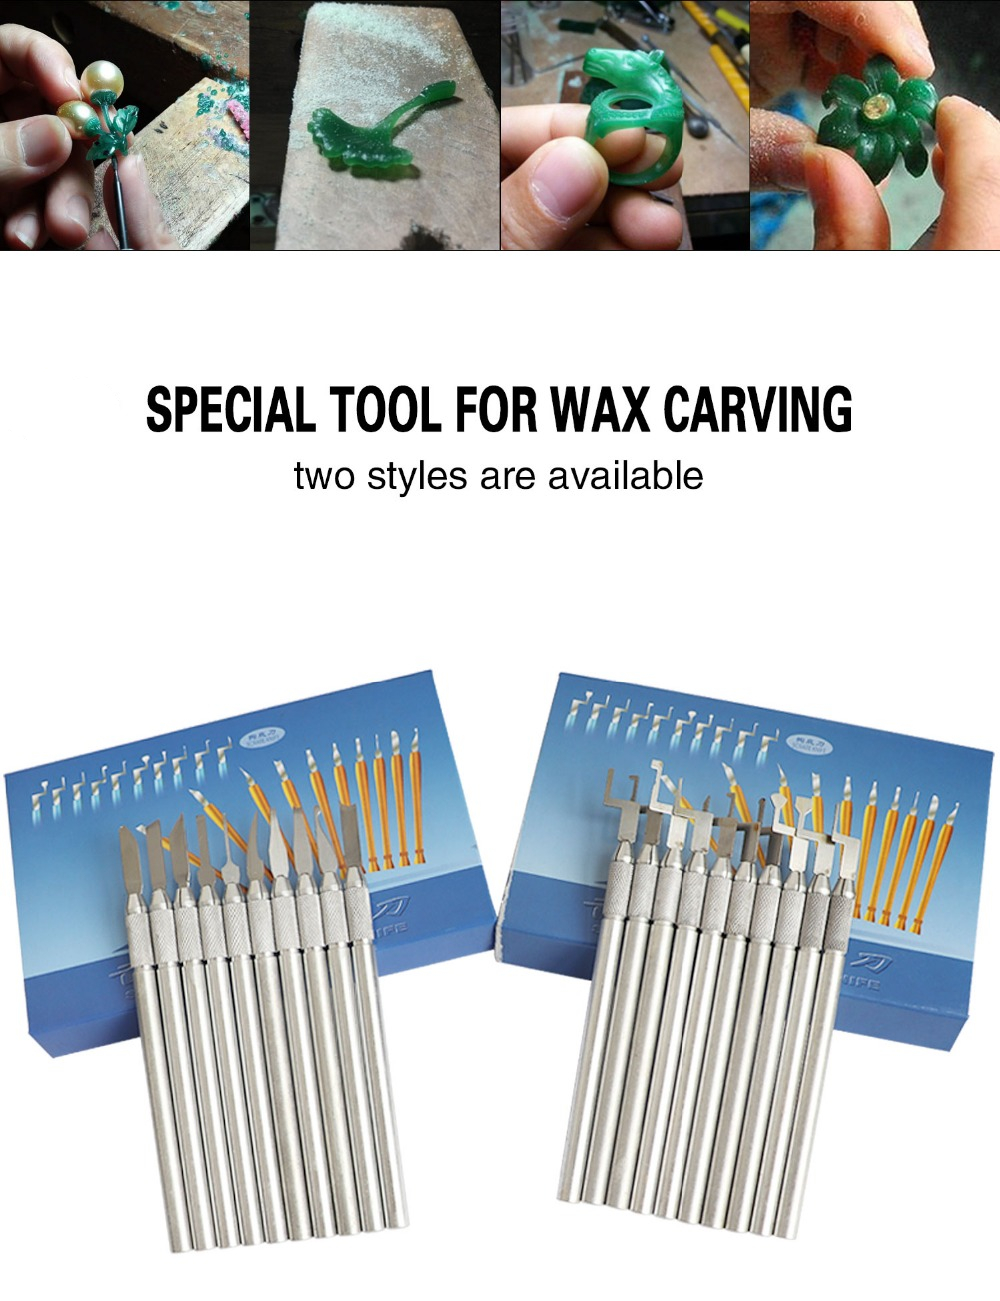 10pcs-Professional-Carving-Chisel-Knife-Hand-Tool-Set-Dental-Lab-Stainless-Steel-Wax-Carving-Tool-1815032-7